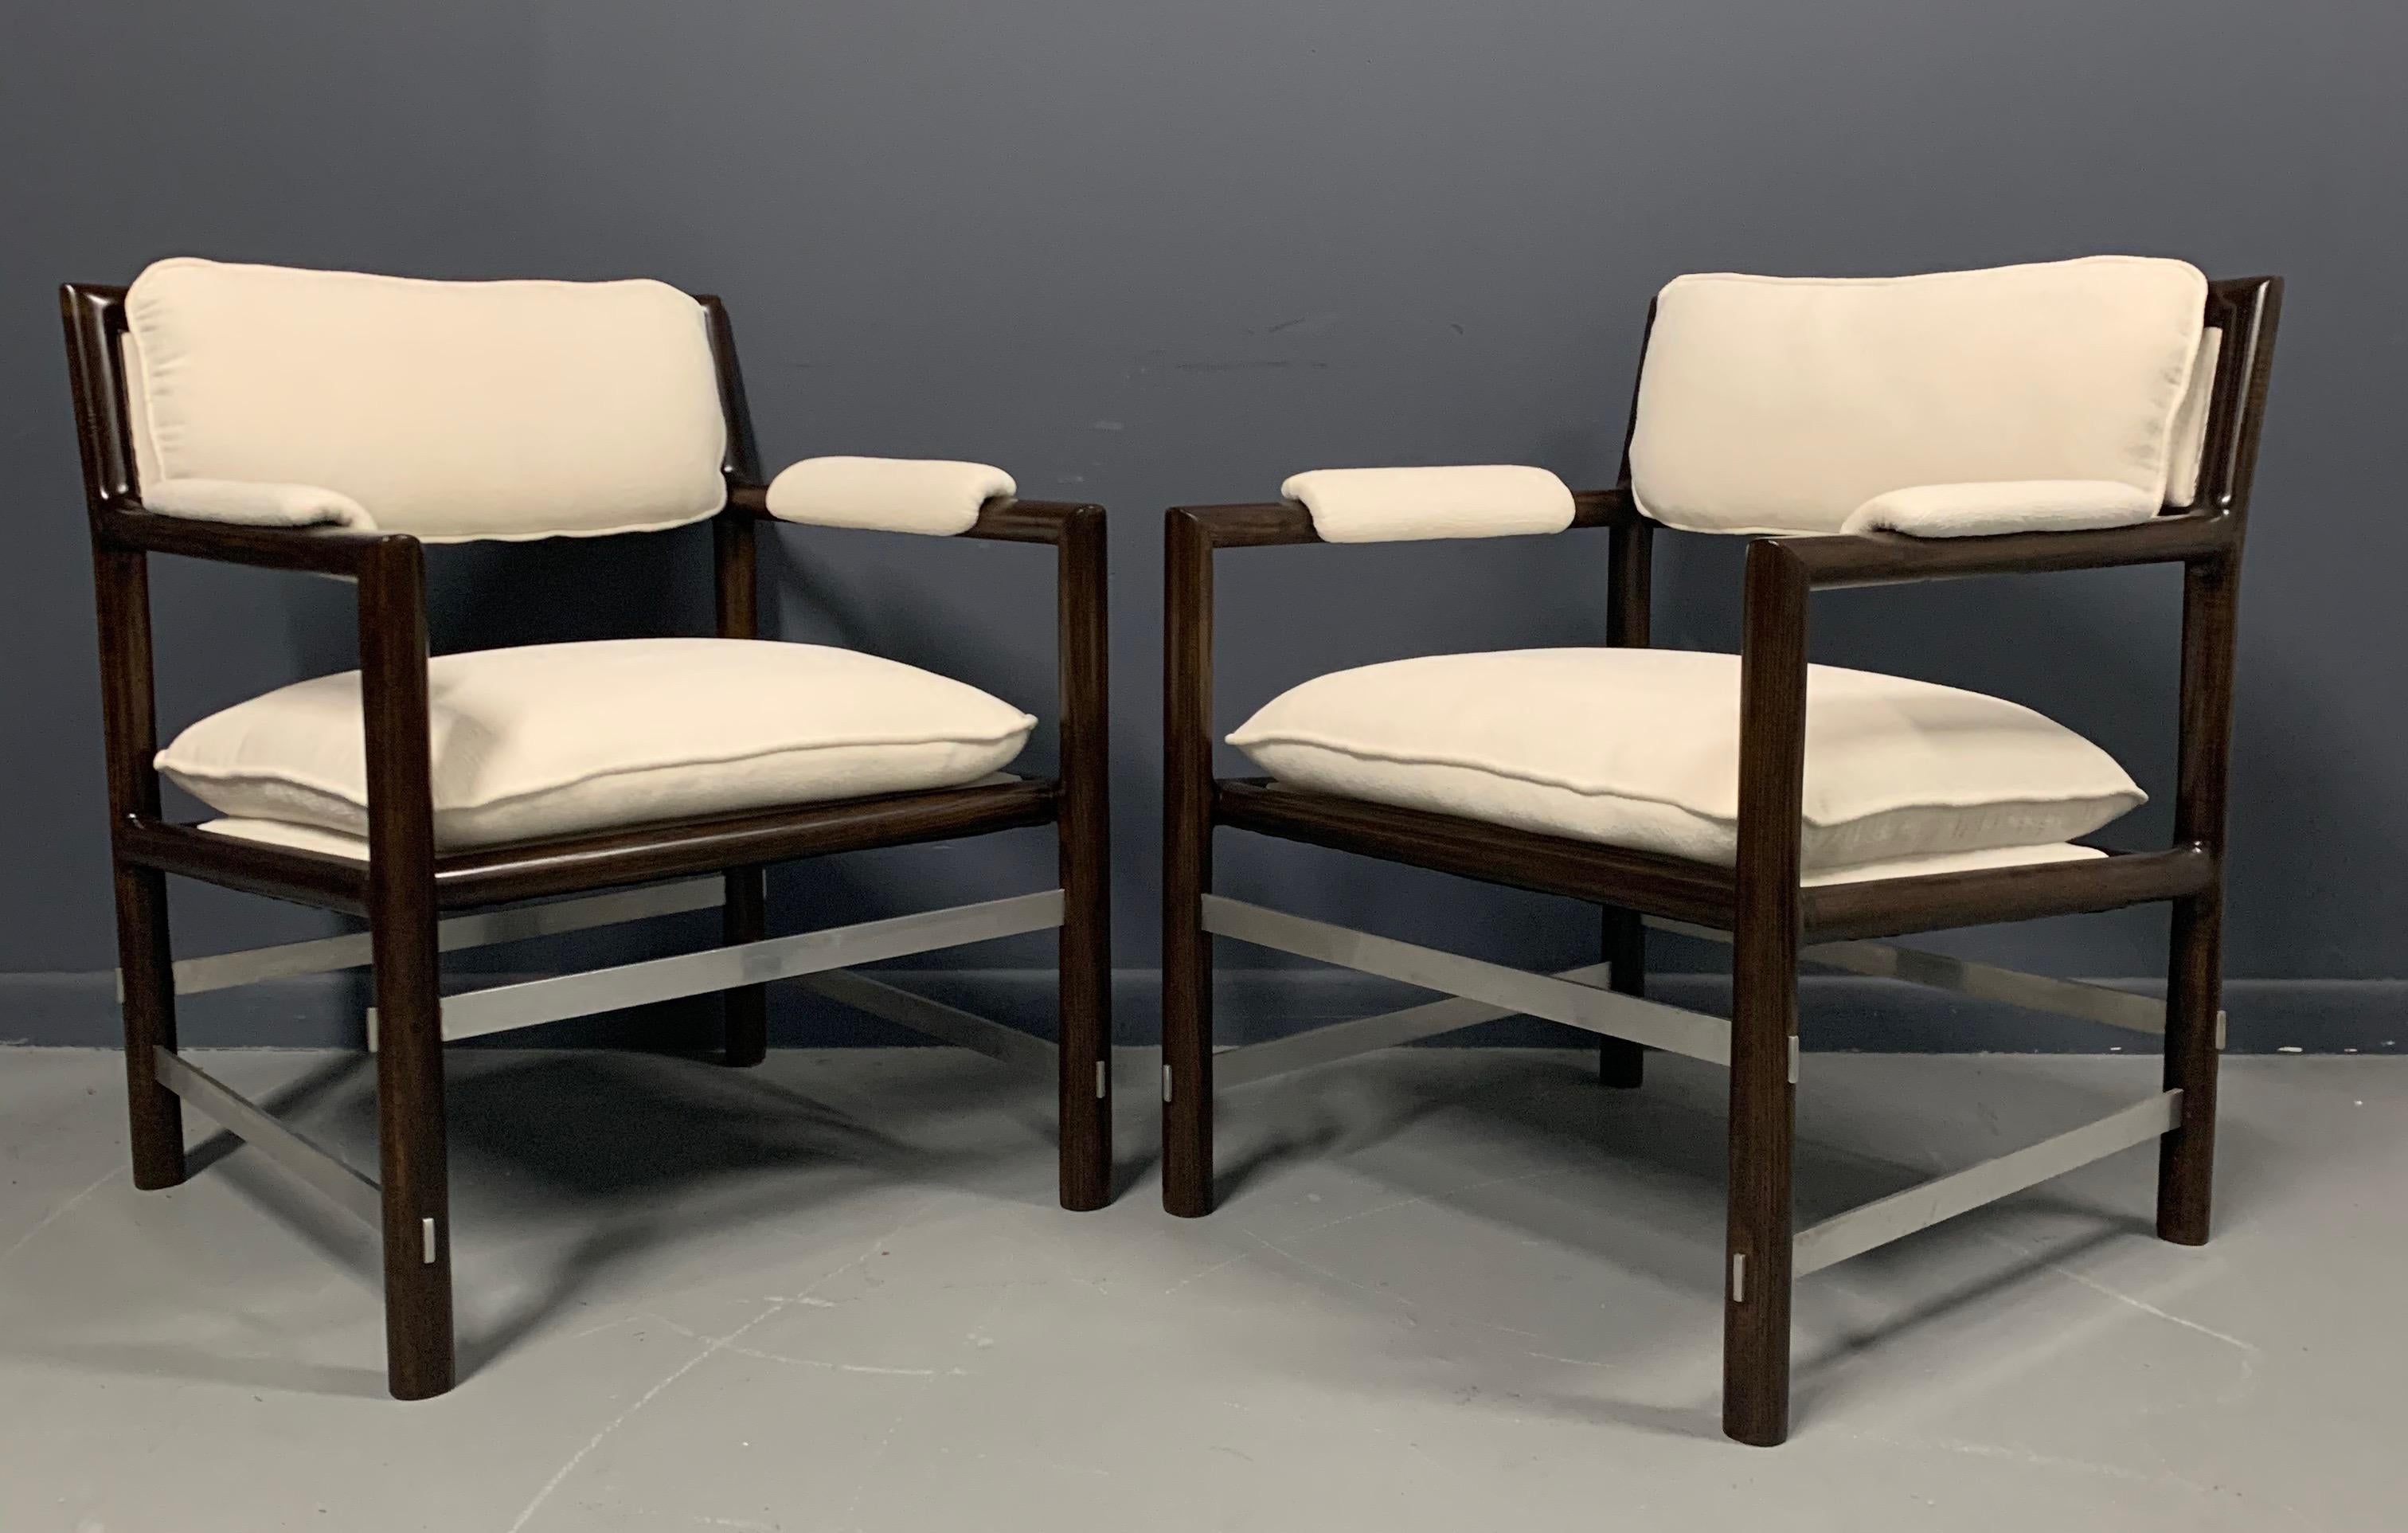 Stunning pair of Edward Wormley for Dunbar armchairs. Dark African mahogany frames with intersecting brushed steel cross stretchers. Newly upholstered in a white textured velvet.